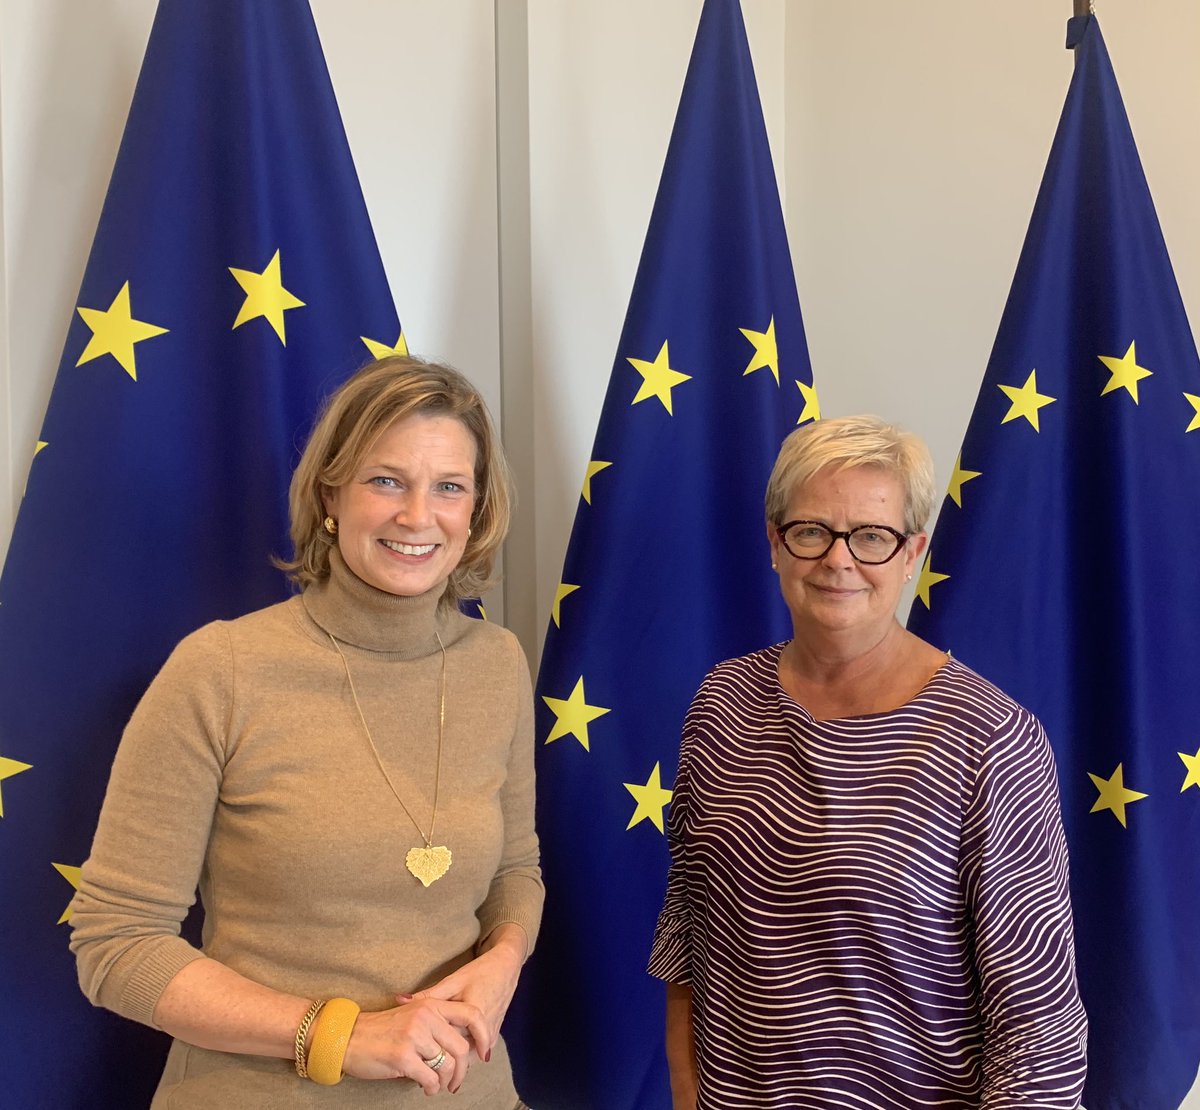 Pleasure to meet again with @sirpa_rautio, now newly appointed Director of @EURightsAgency 👏 to discuss - together with her wonderful team - how to enhance our common fight against #Antisemitism in the light of current explosion of Jew-hatred and antisemitic incidents in Europe.